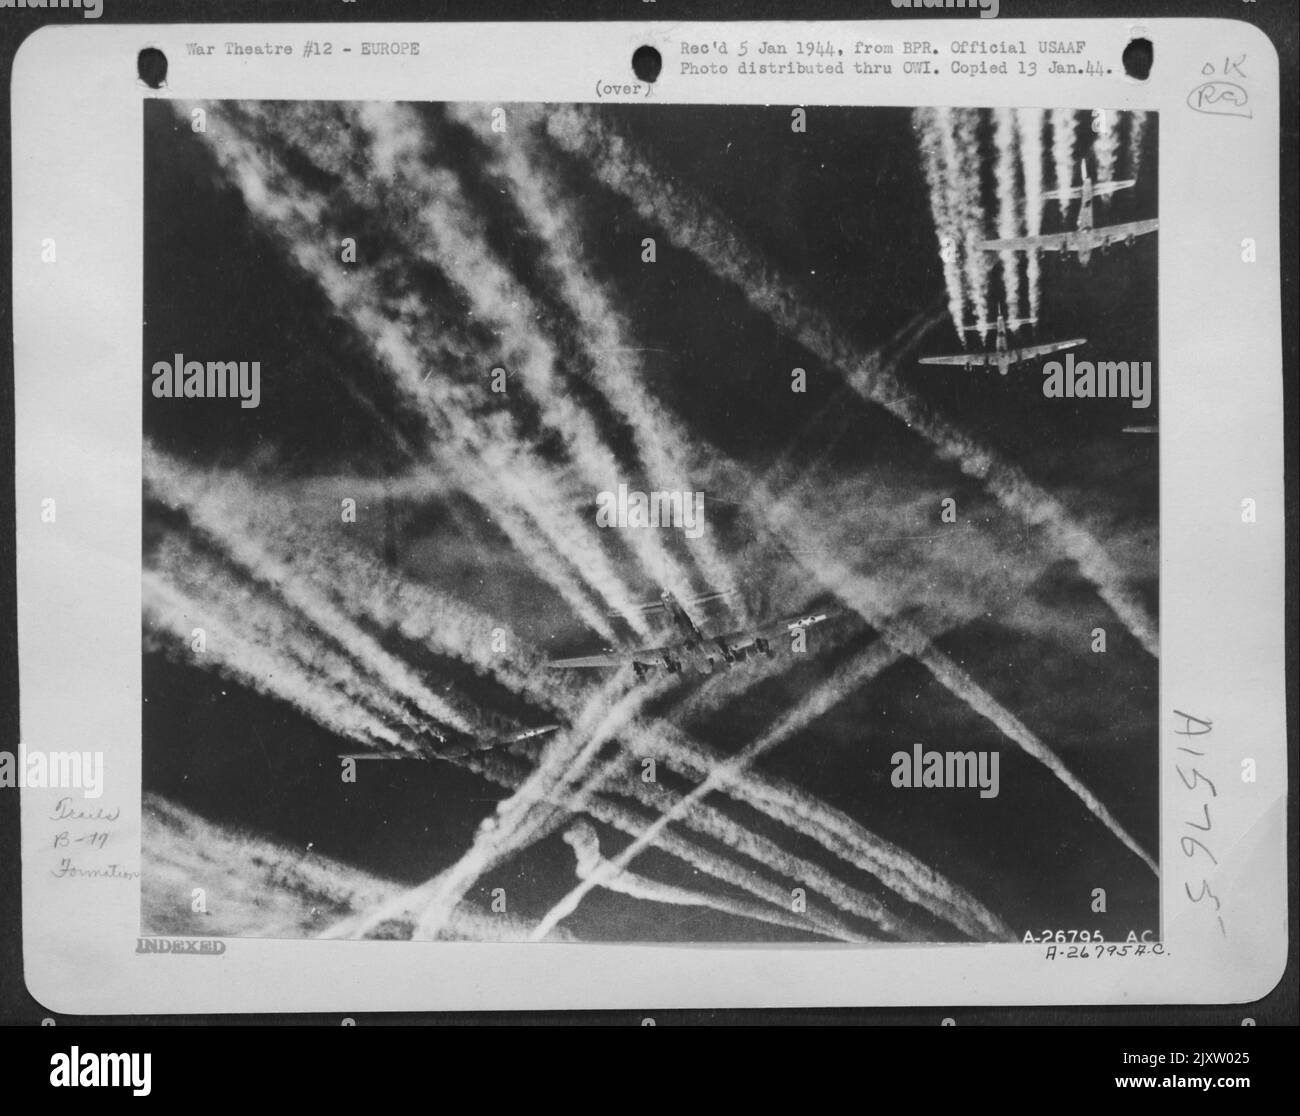 GHOST TRACKS:--ofrtresses of the Eighth Air force penetrating deep into skies over enemy occupied territory shown leaving tell tale condensation trails in their wake. Although these vapor etchings may satisfy the esthetic sense, they are usually Stock Photo